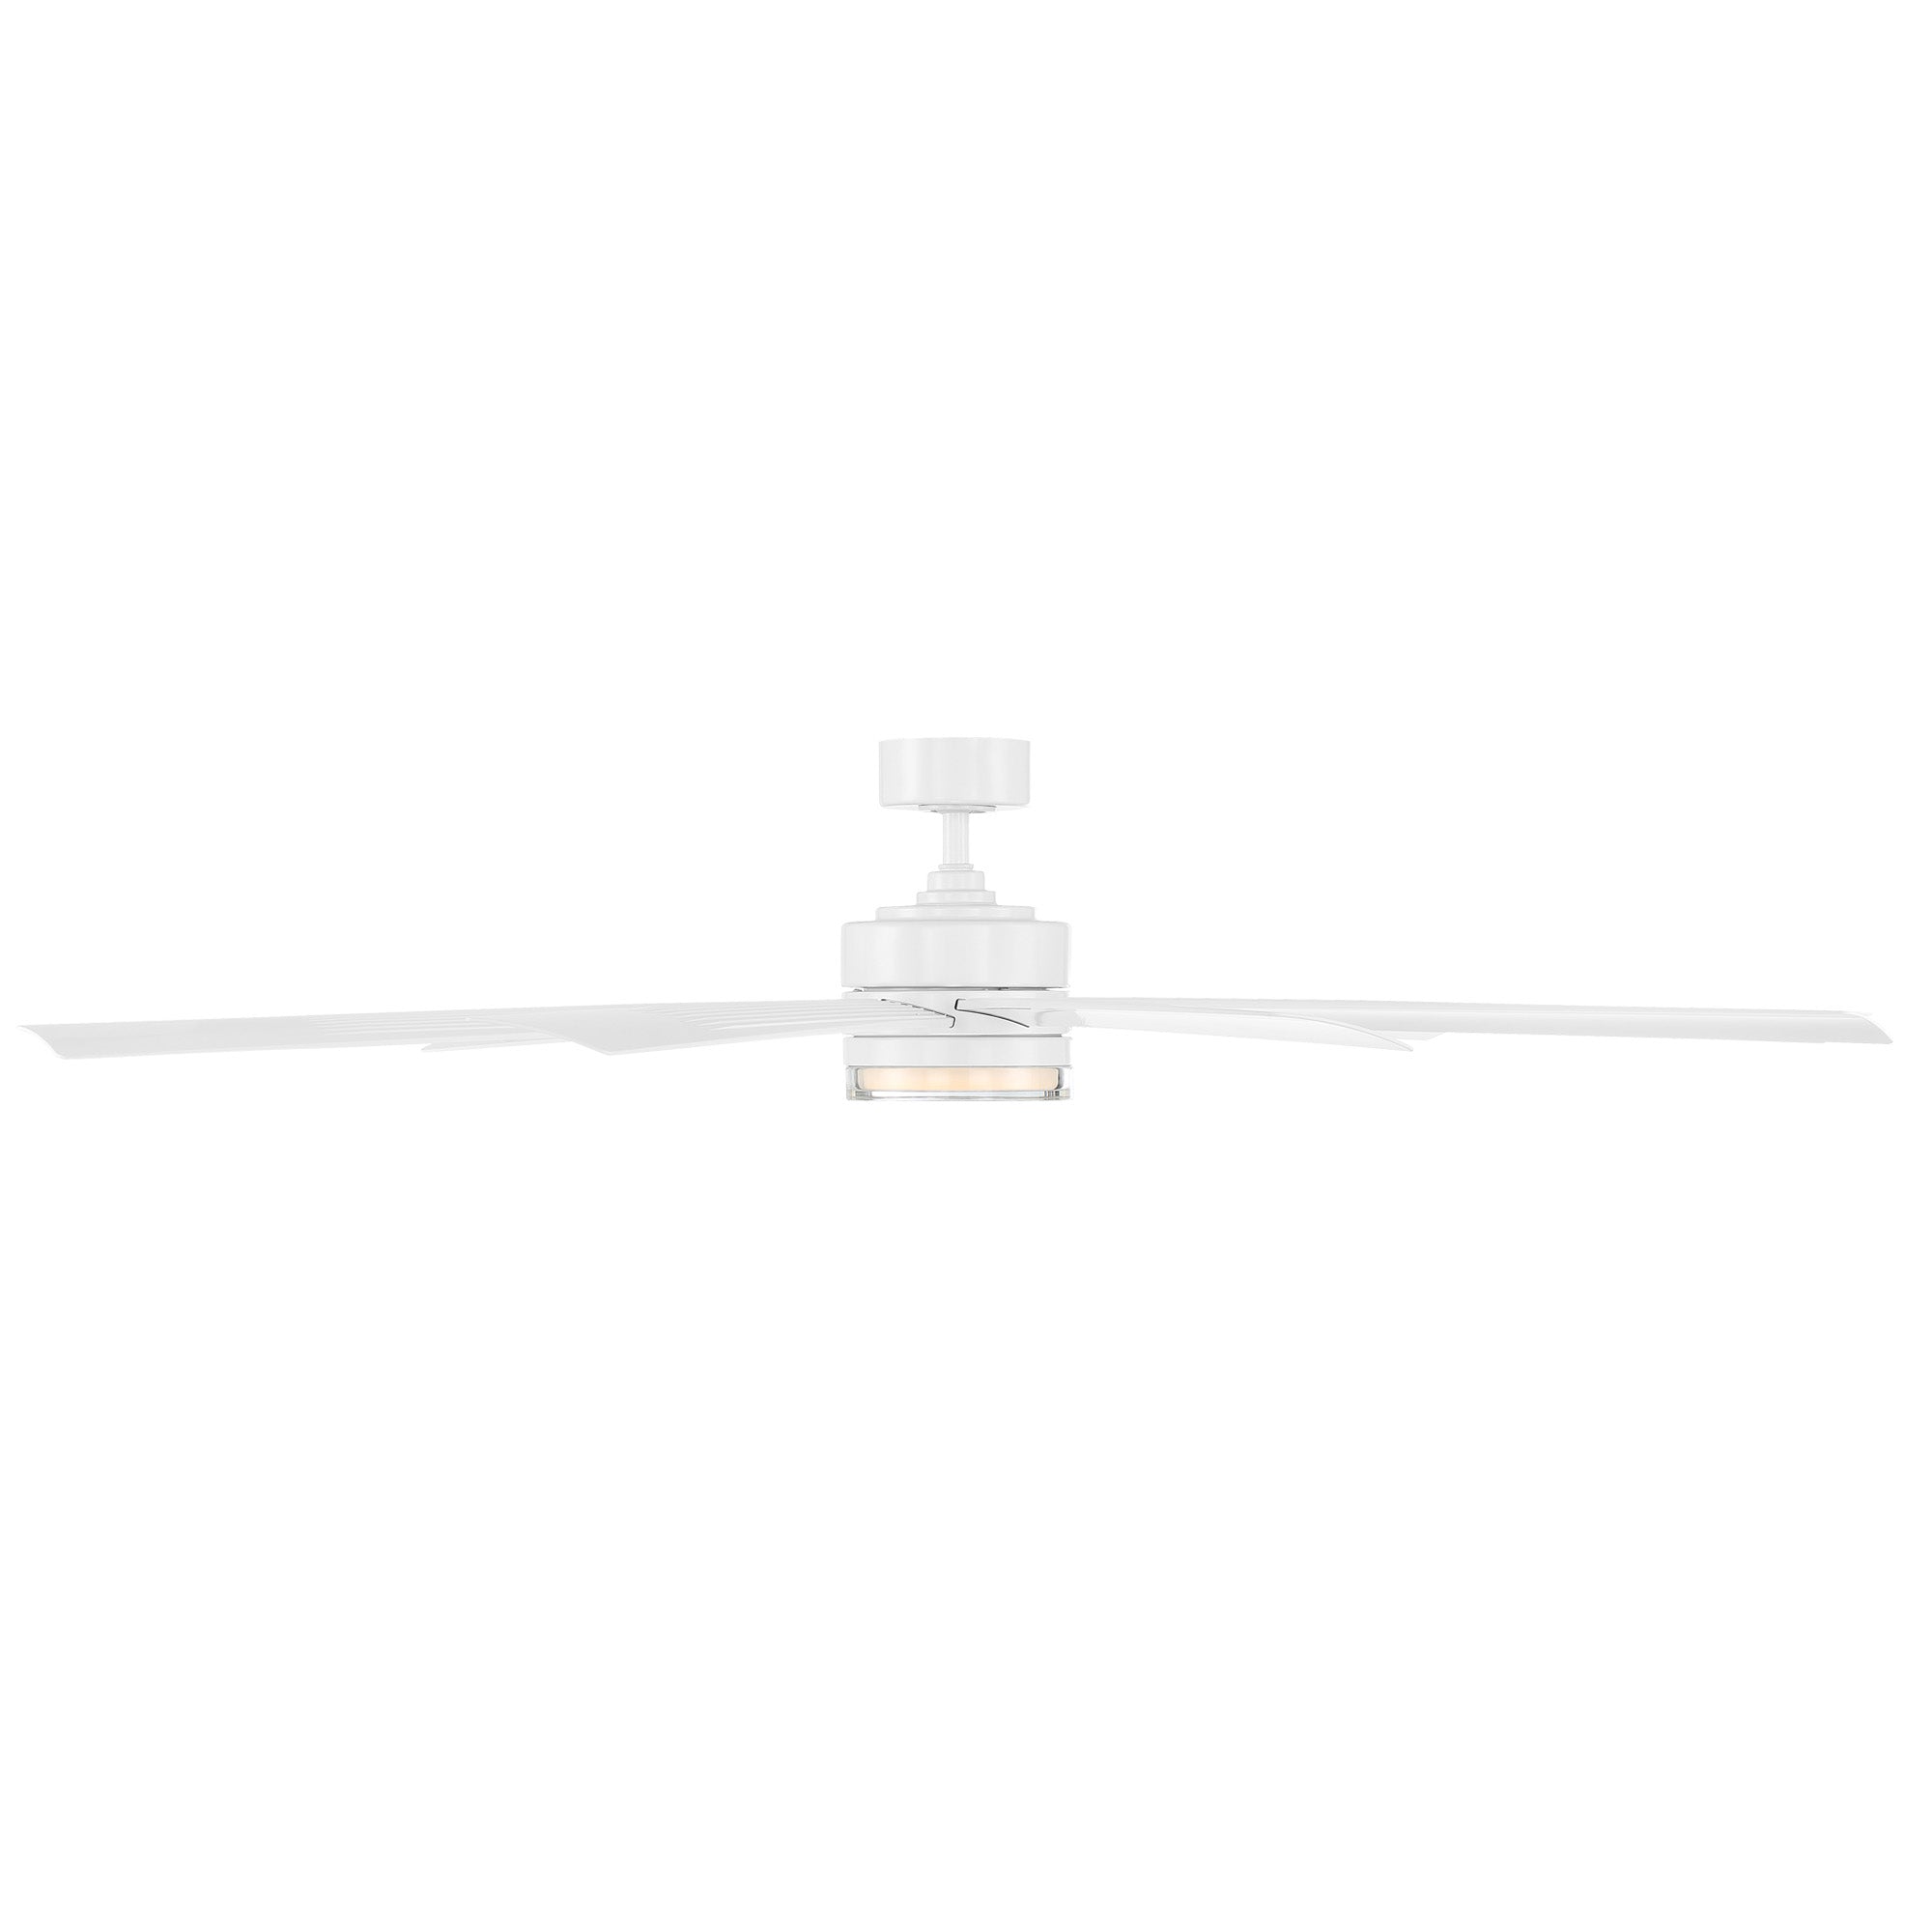 Wynd XL Indoor/Outdoor 9-Blade 72" Smart Ceiling Fan with LED Light Kit and Remote Control